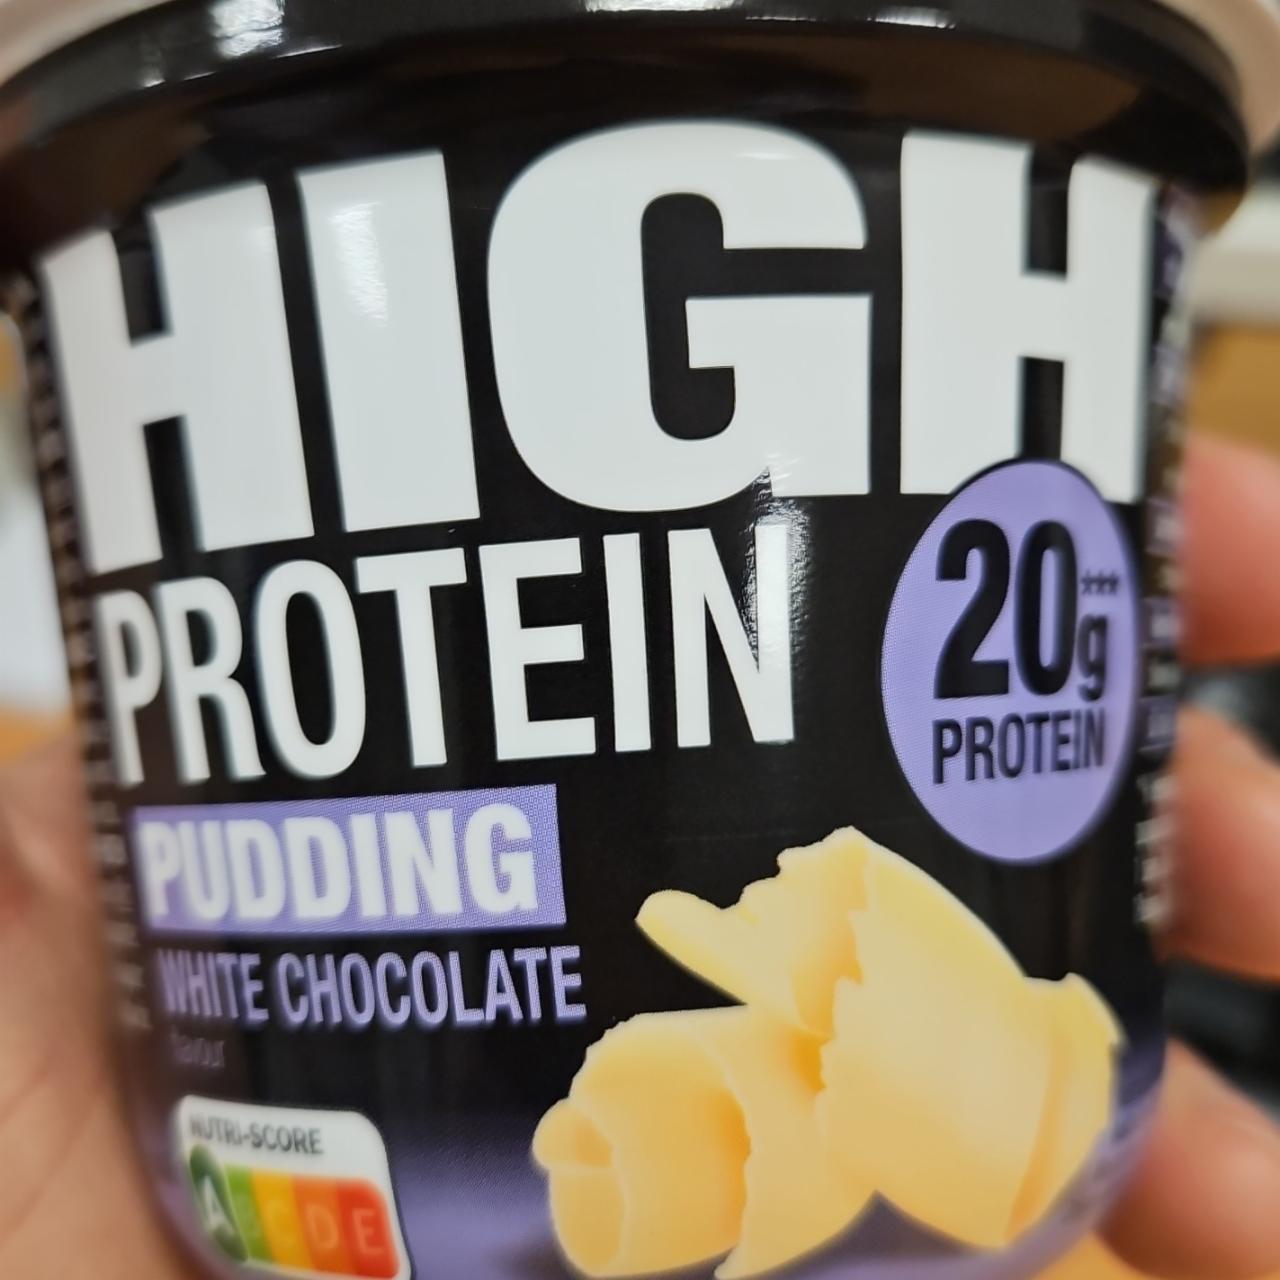 Fotografie - High protein pudding white chocolate flavour 20g protein No comment